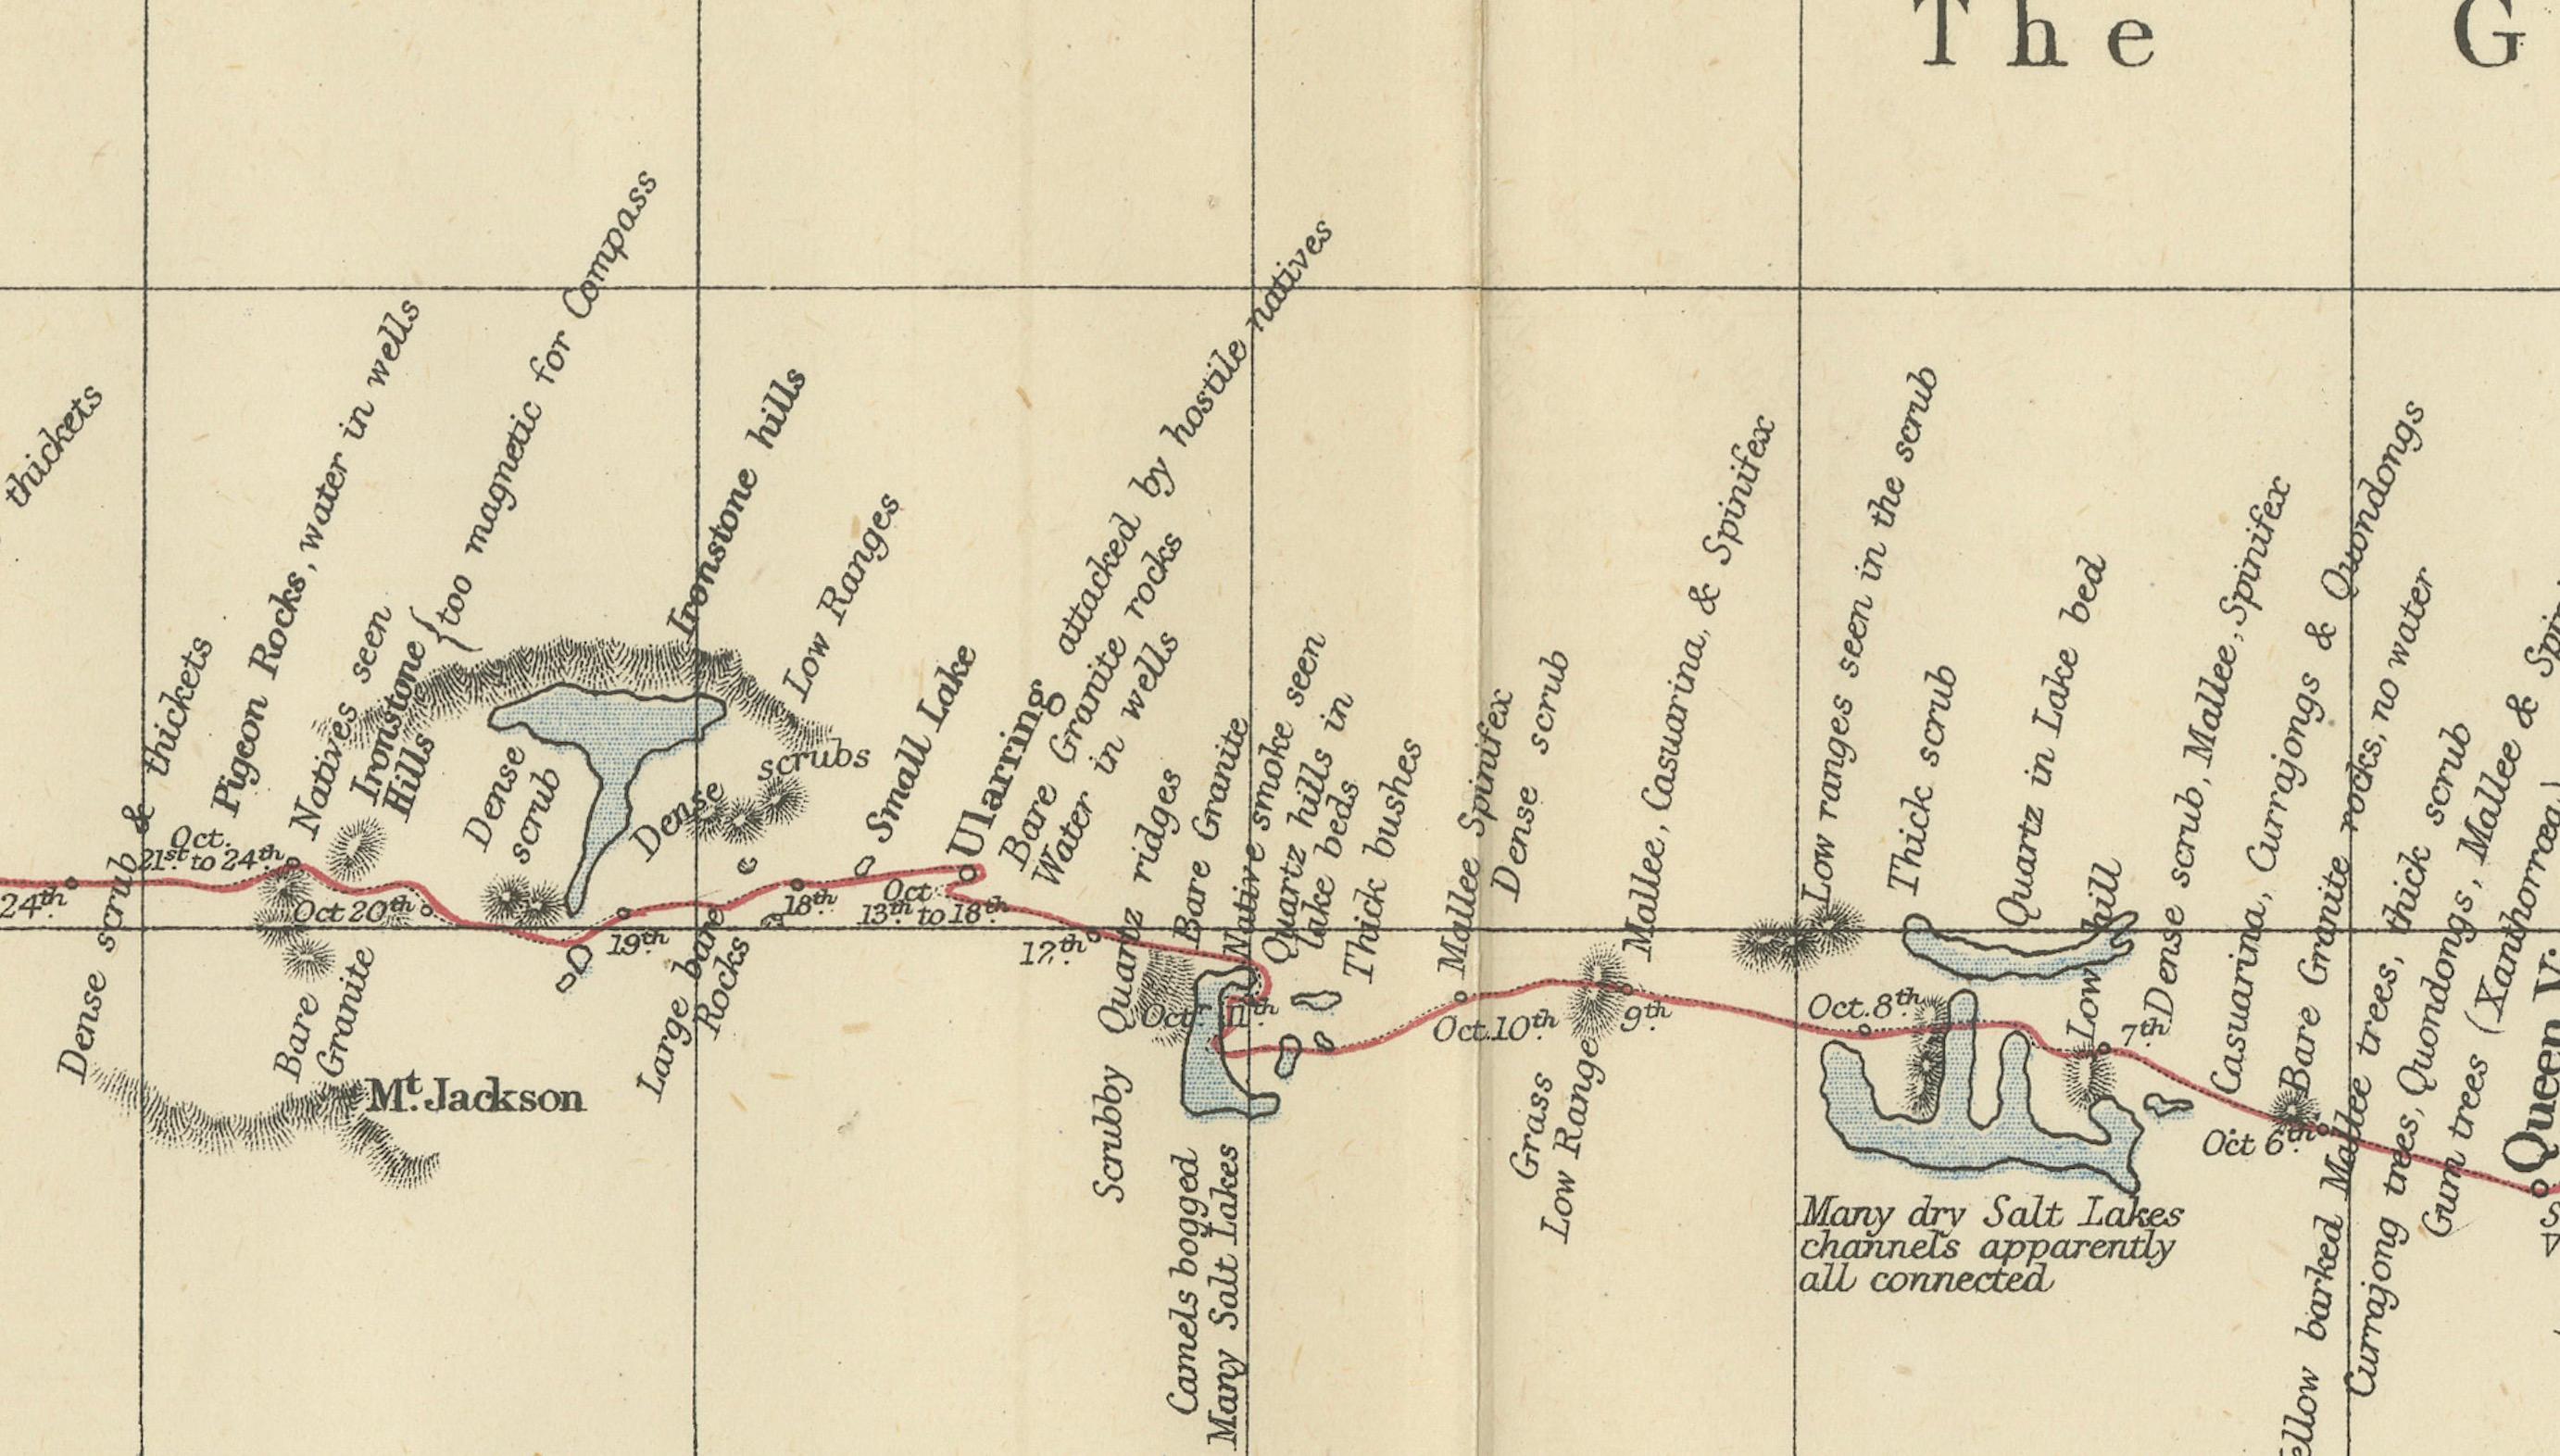 The map shows the route of the 1875 exploration led by Ernest Giles from Beltana Station in South Australia to the city of Perth in Western Australia. This was Giles' fourth and most significant expedition, setting out on May 6, 1875, from Thomas